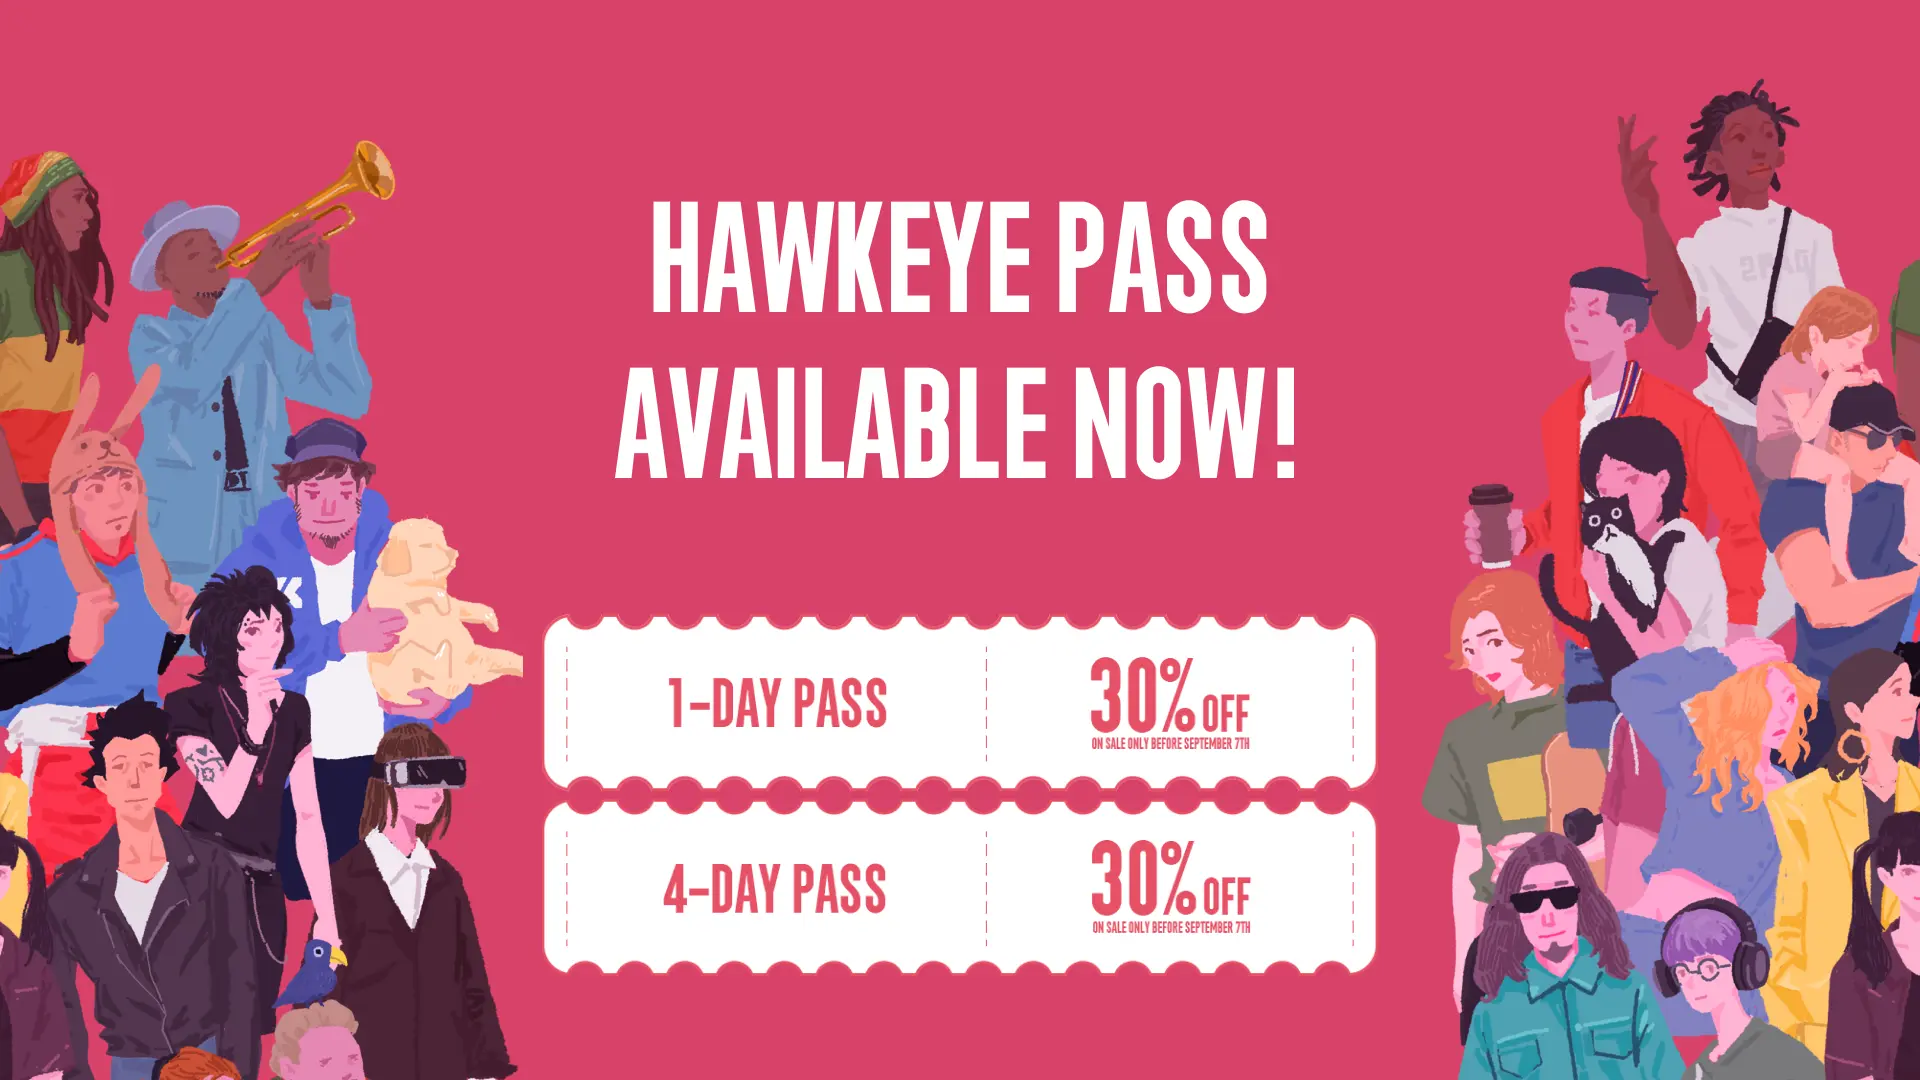 IMX 2023 Announces Hawkeye Pass - 30% Off Until September 7